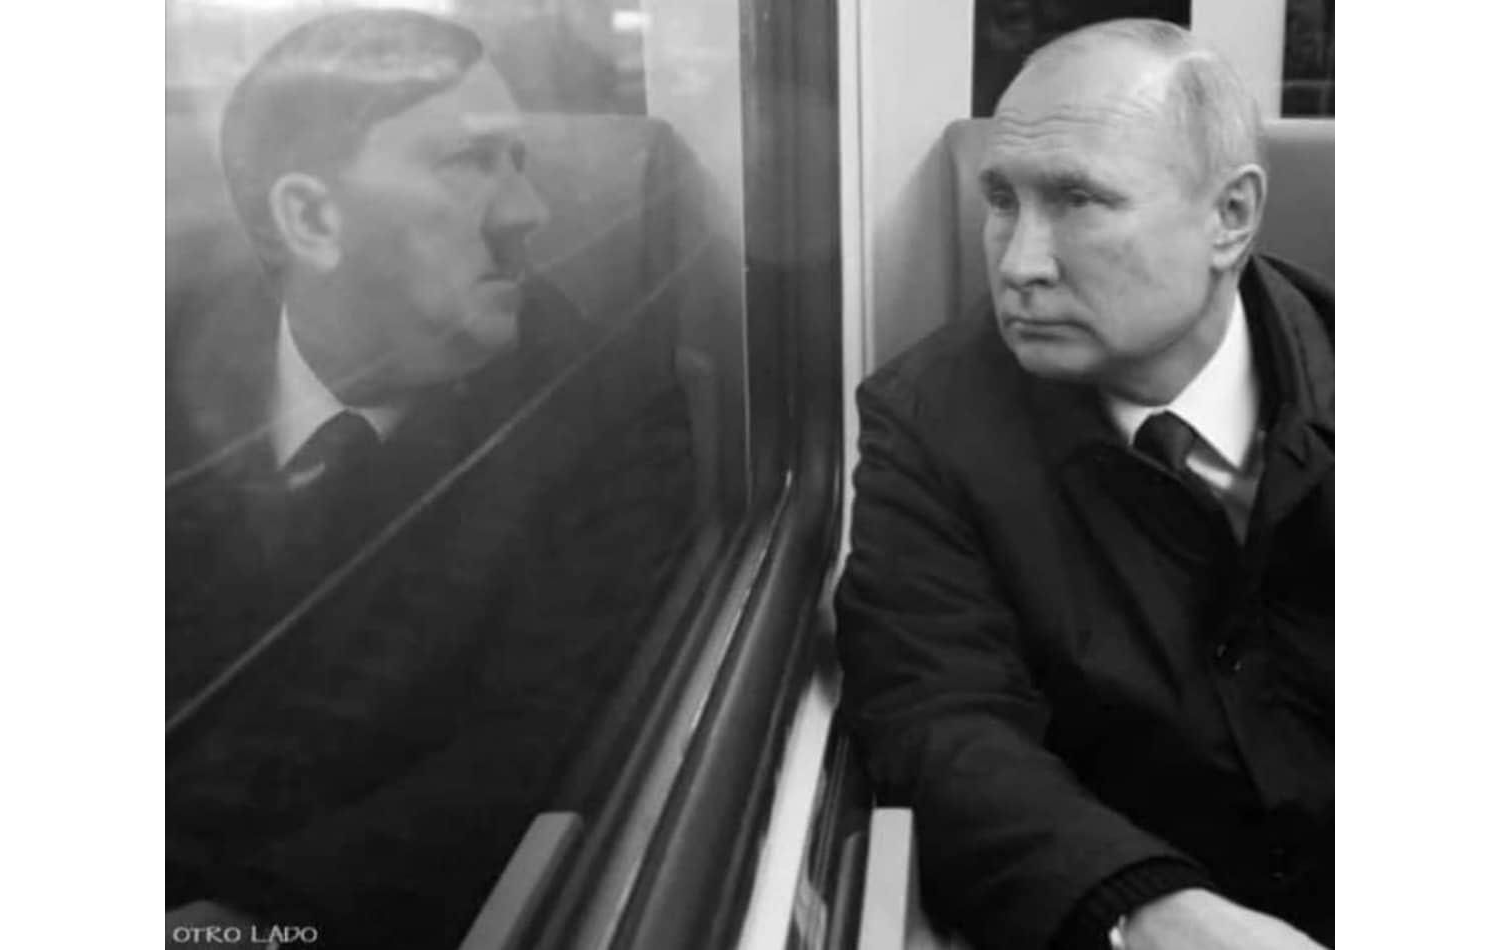 Did we tolerate Hitler? How long will we tolerate Putin? - Kyiv Post -  Ukraine's Global Voice